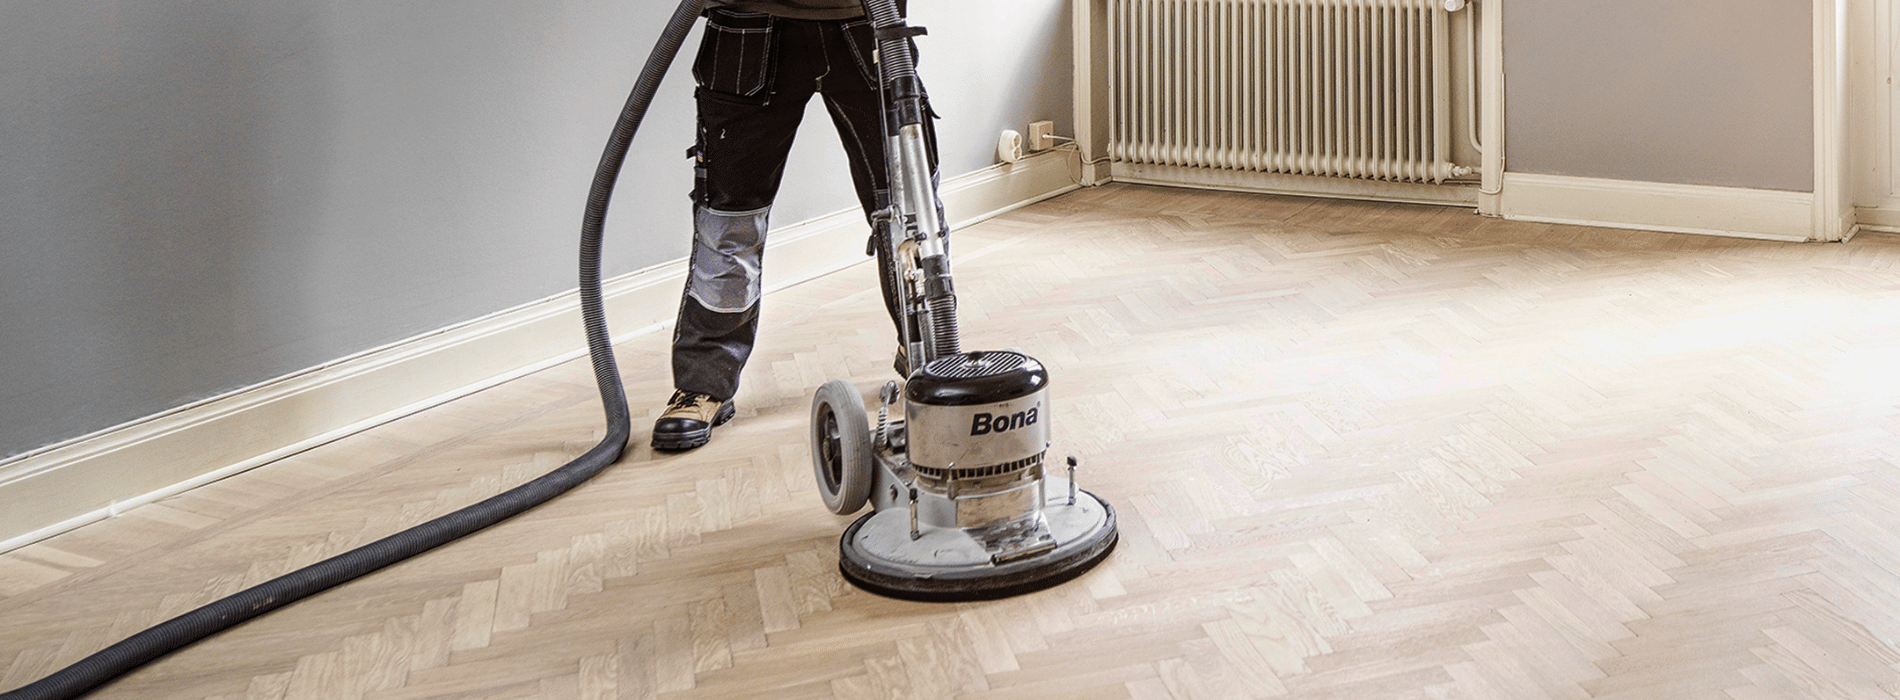 In Greater London (North West), Mr Sander® using a Bona FlexiSand 1.9, a powerful buffer sander with a 407 mm dimension, 1.9 kW effect, and 230 V voltage. With a frequency of 50 Hz/60 Hz, it connects to a dust extraction system with a HEPA filter for optimal cleanliness and efficiency during the sanding of a herringbone floor.